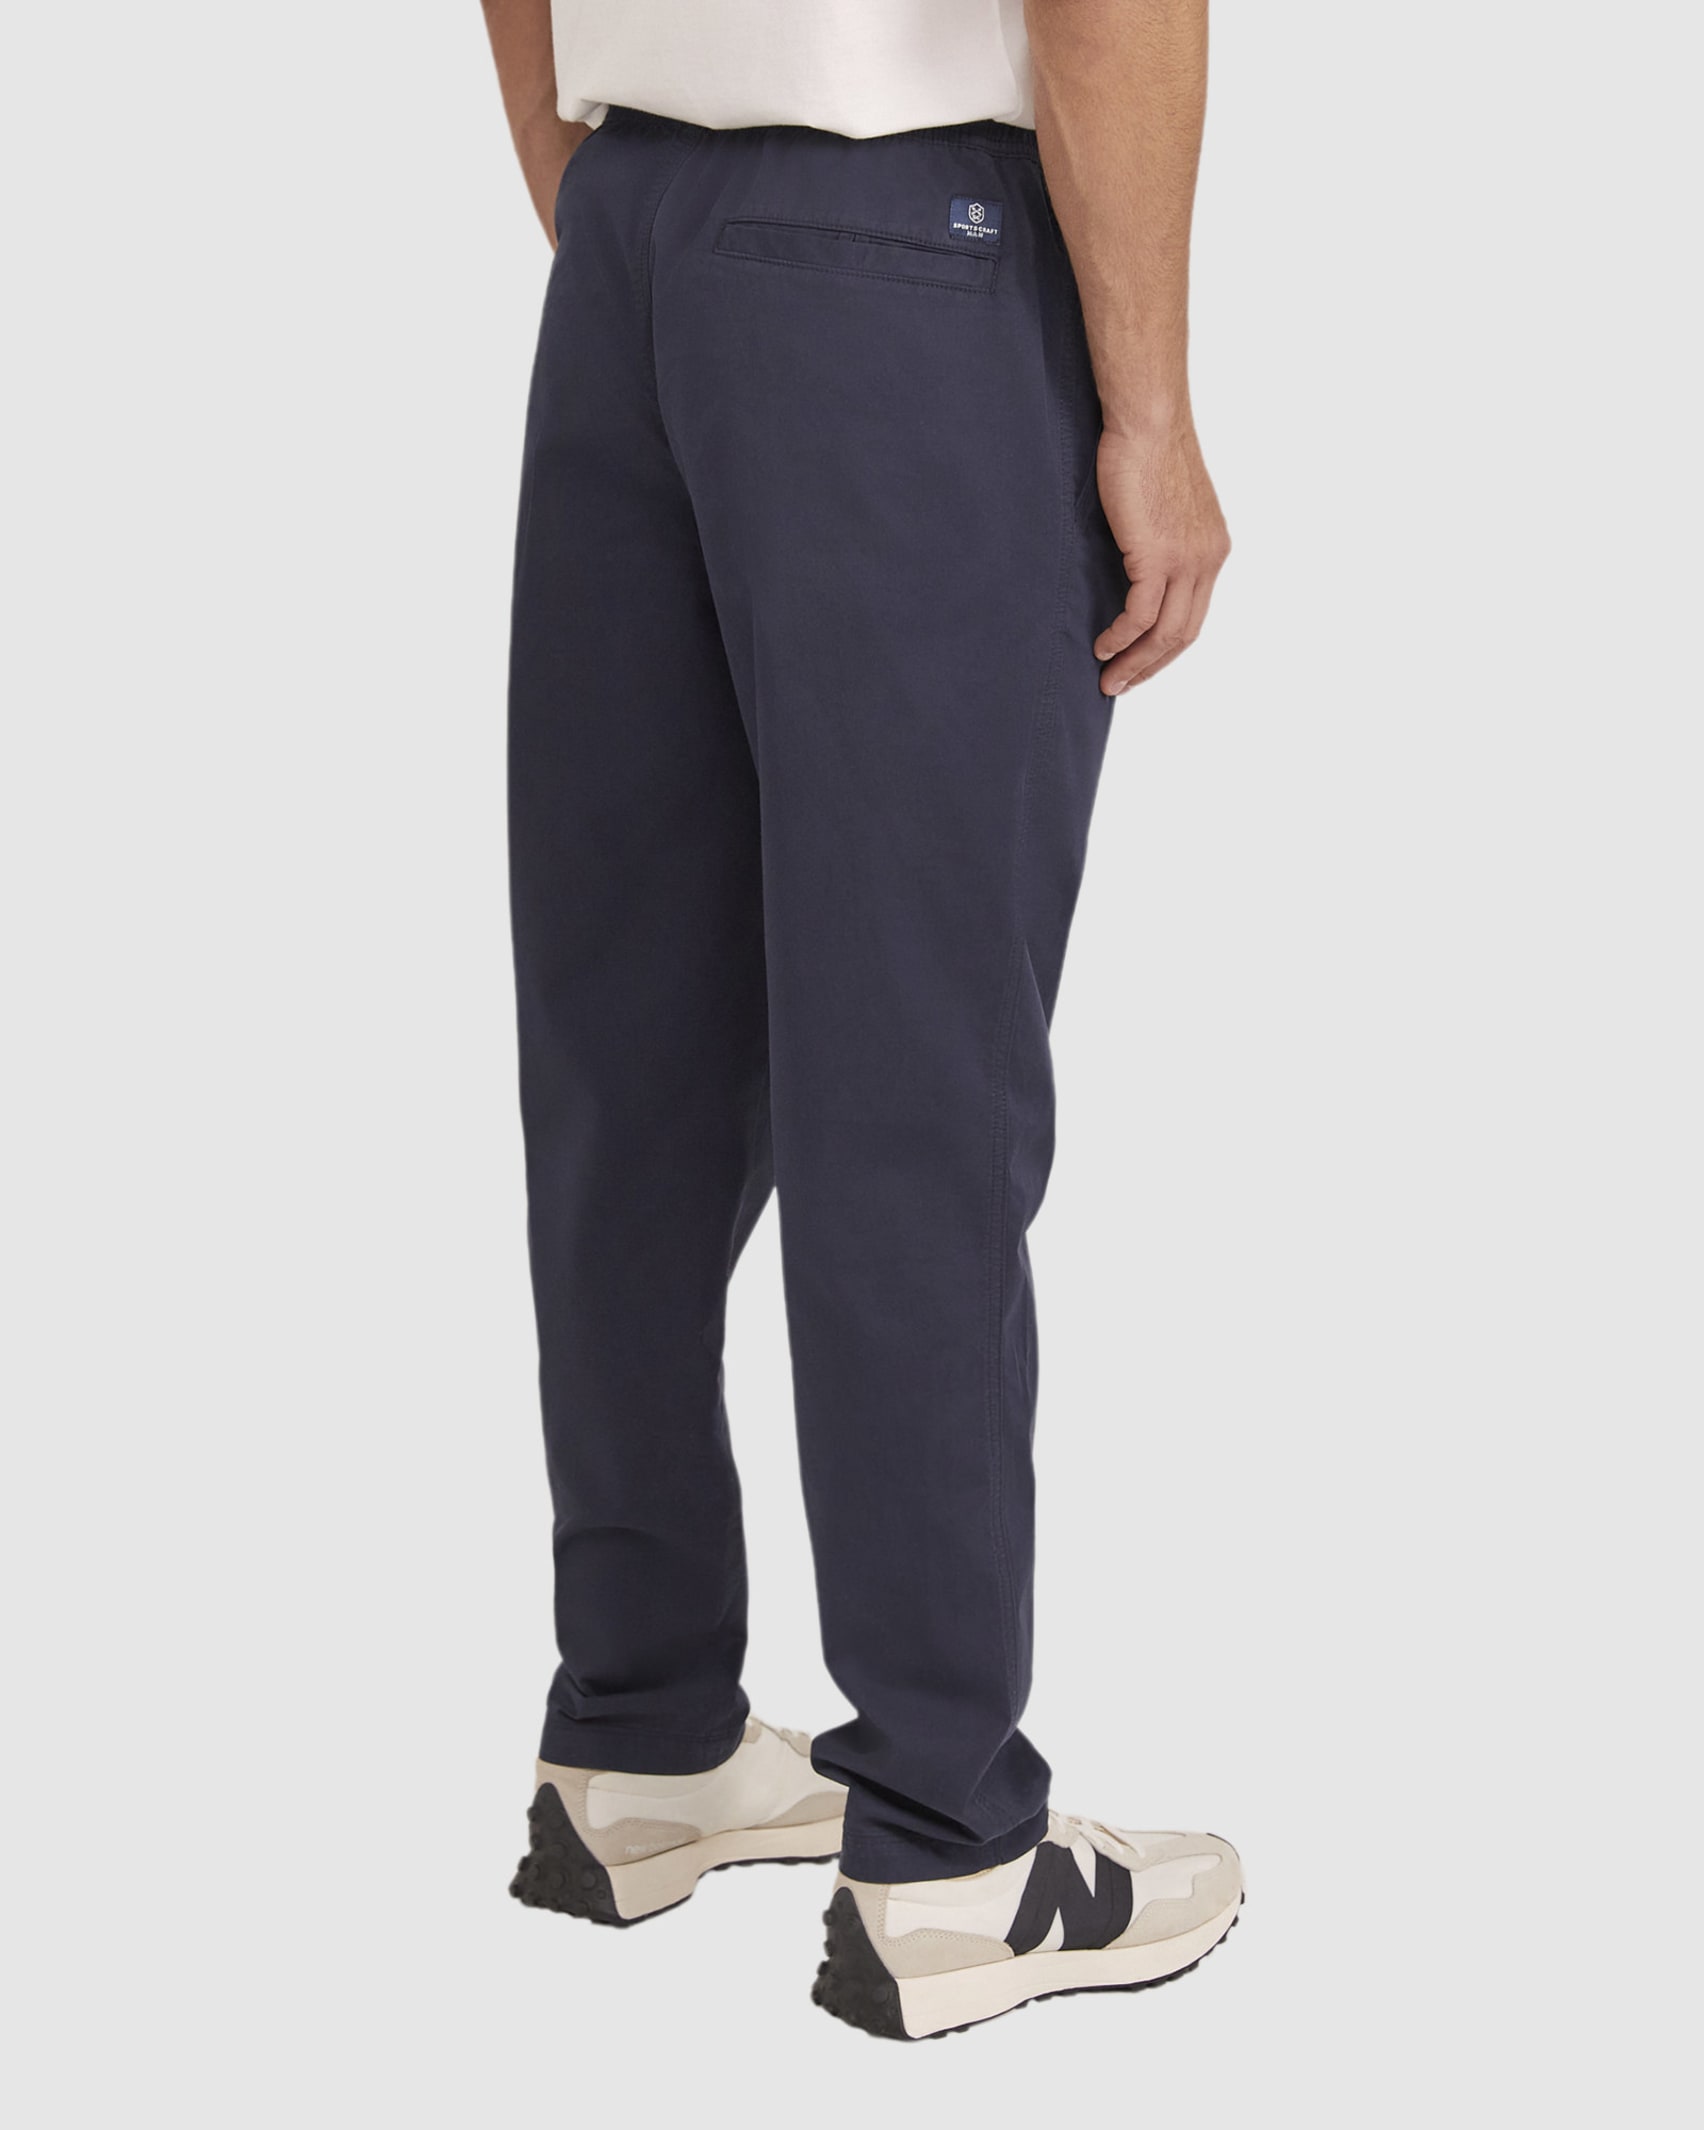 Shen Pant in NAVY